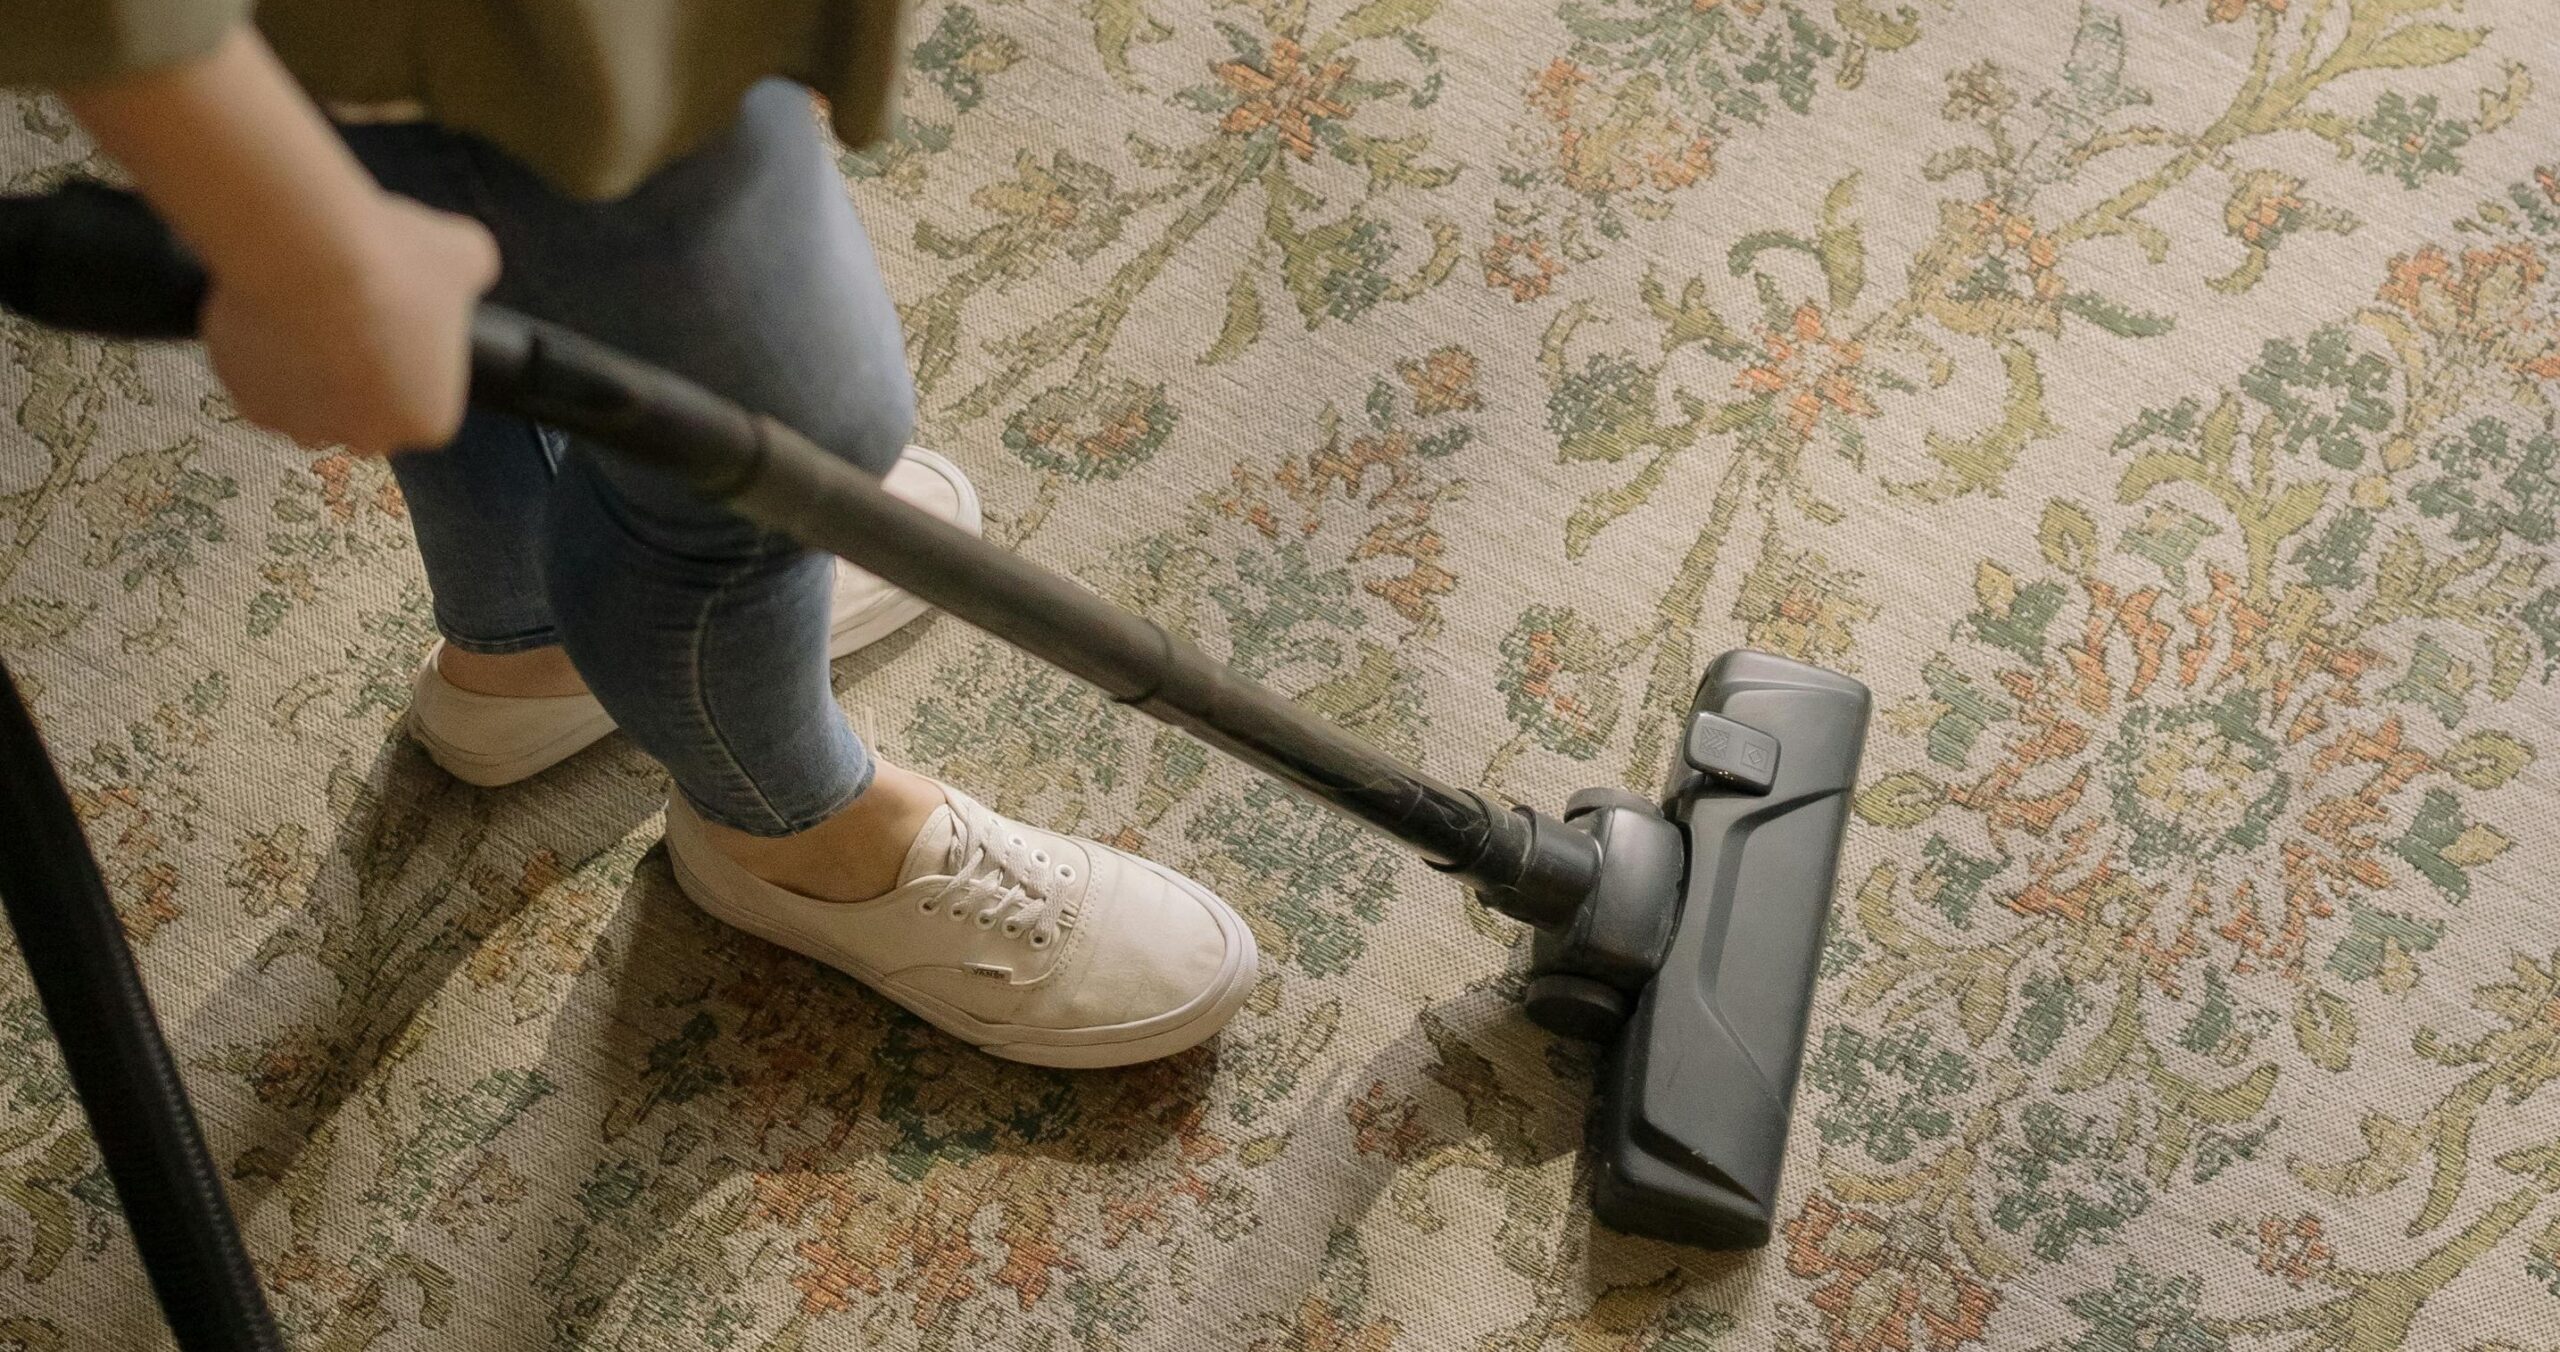 Using a suction vacuum is a safer option for removing dust and soil from oriental rugs.